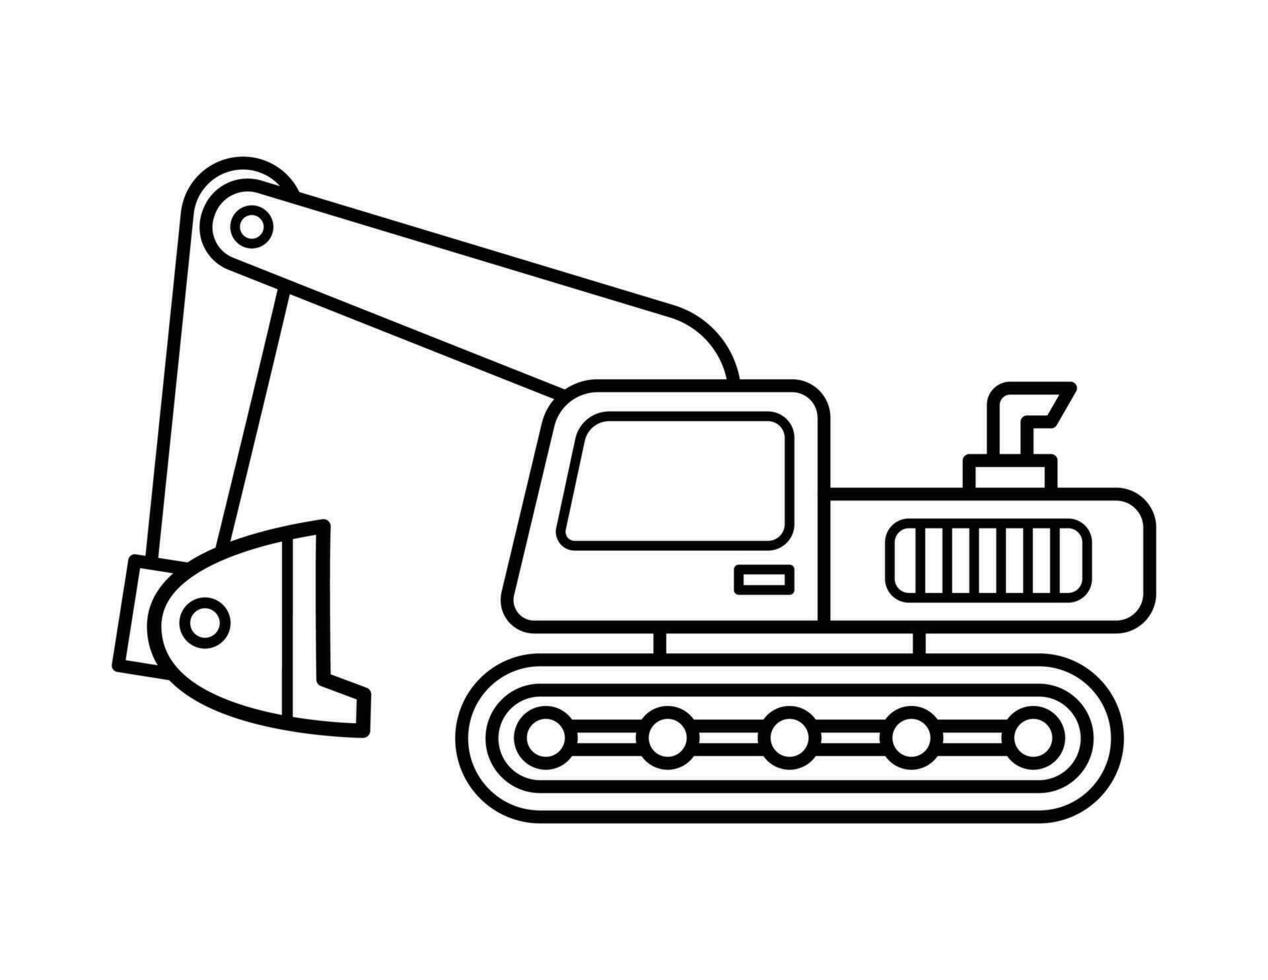 Excavator Coloring Page For Children vector